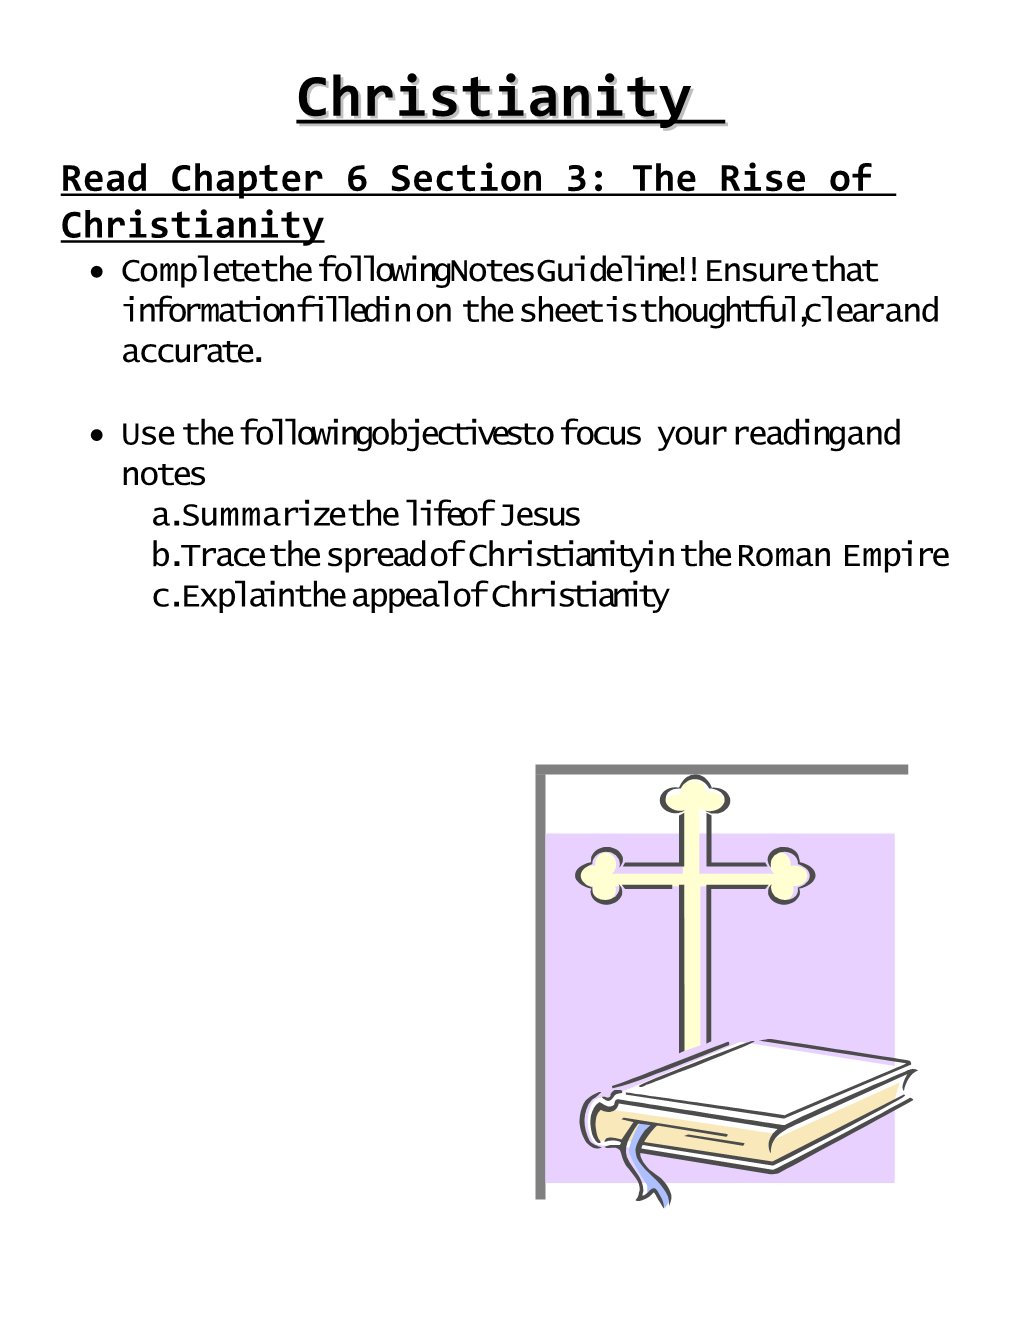 Read Chapter 6 Section 3: the Rise of Christianity